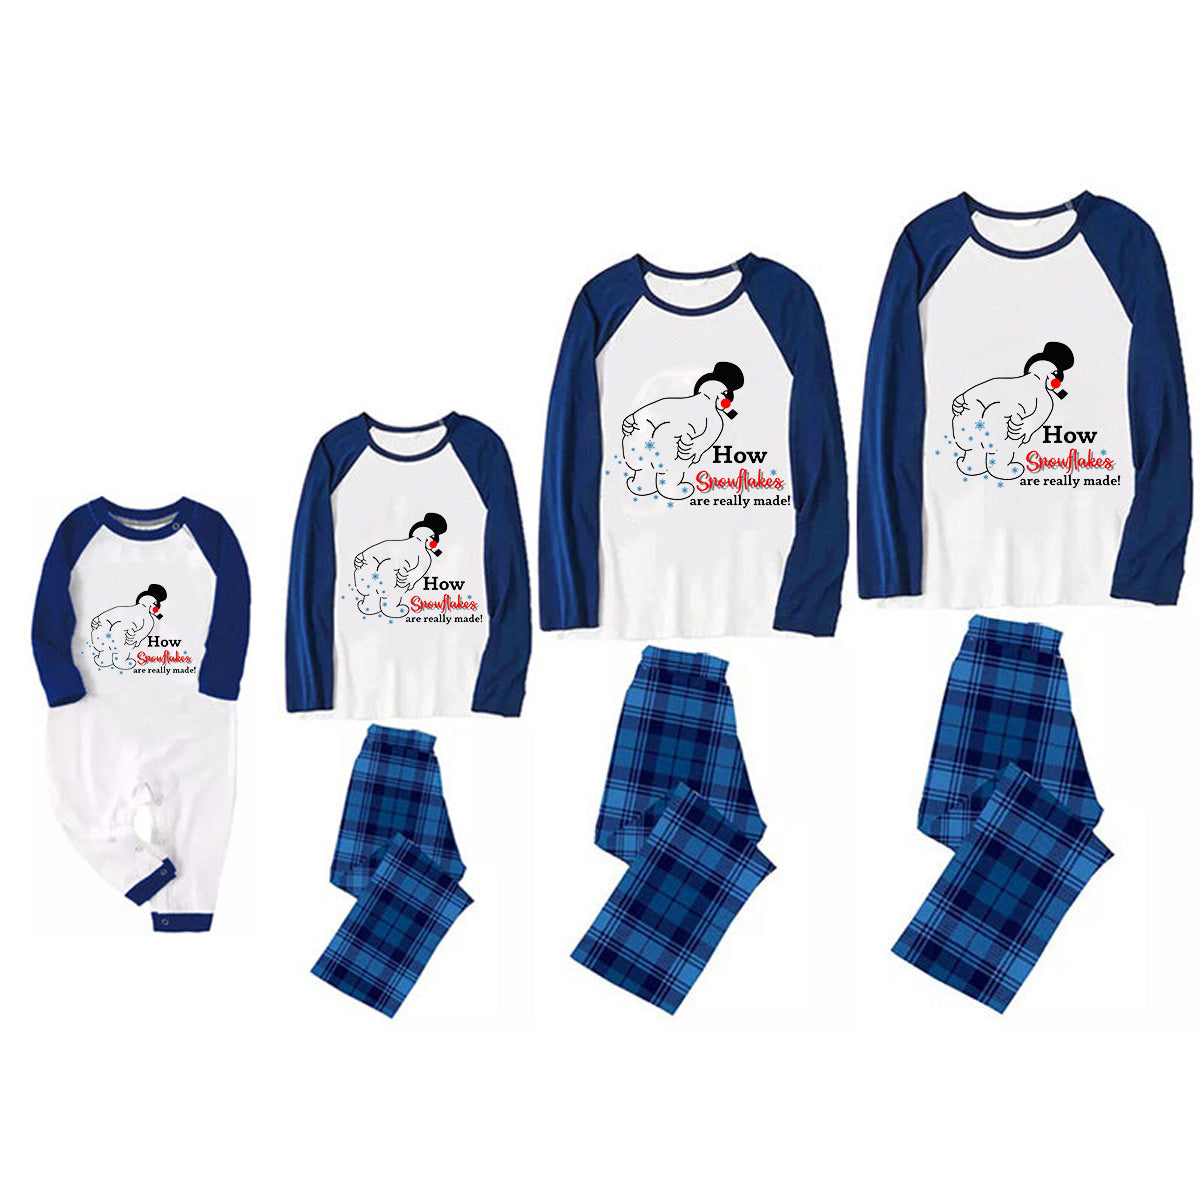 Christmas pajamas "How Snowflakes are Really Made" letter print, blue and white patchwork top and blue plaid pants Matching Pajamas With Dog